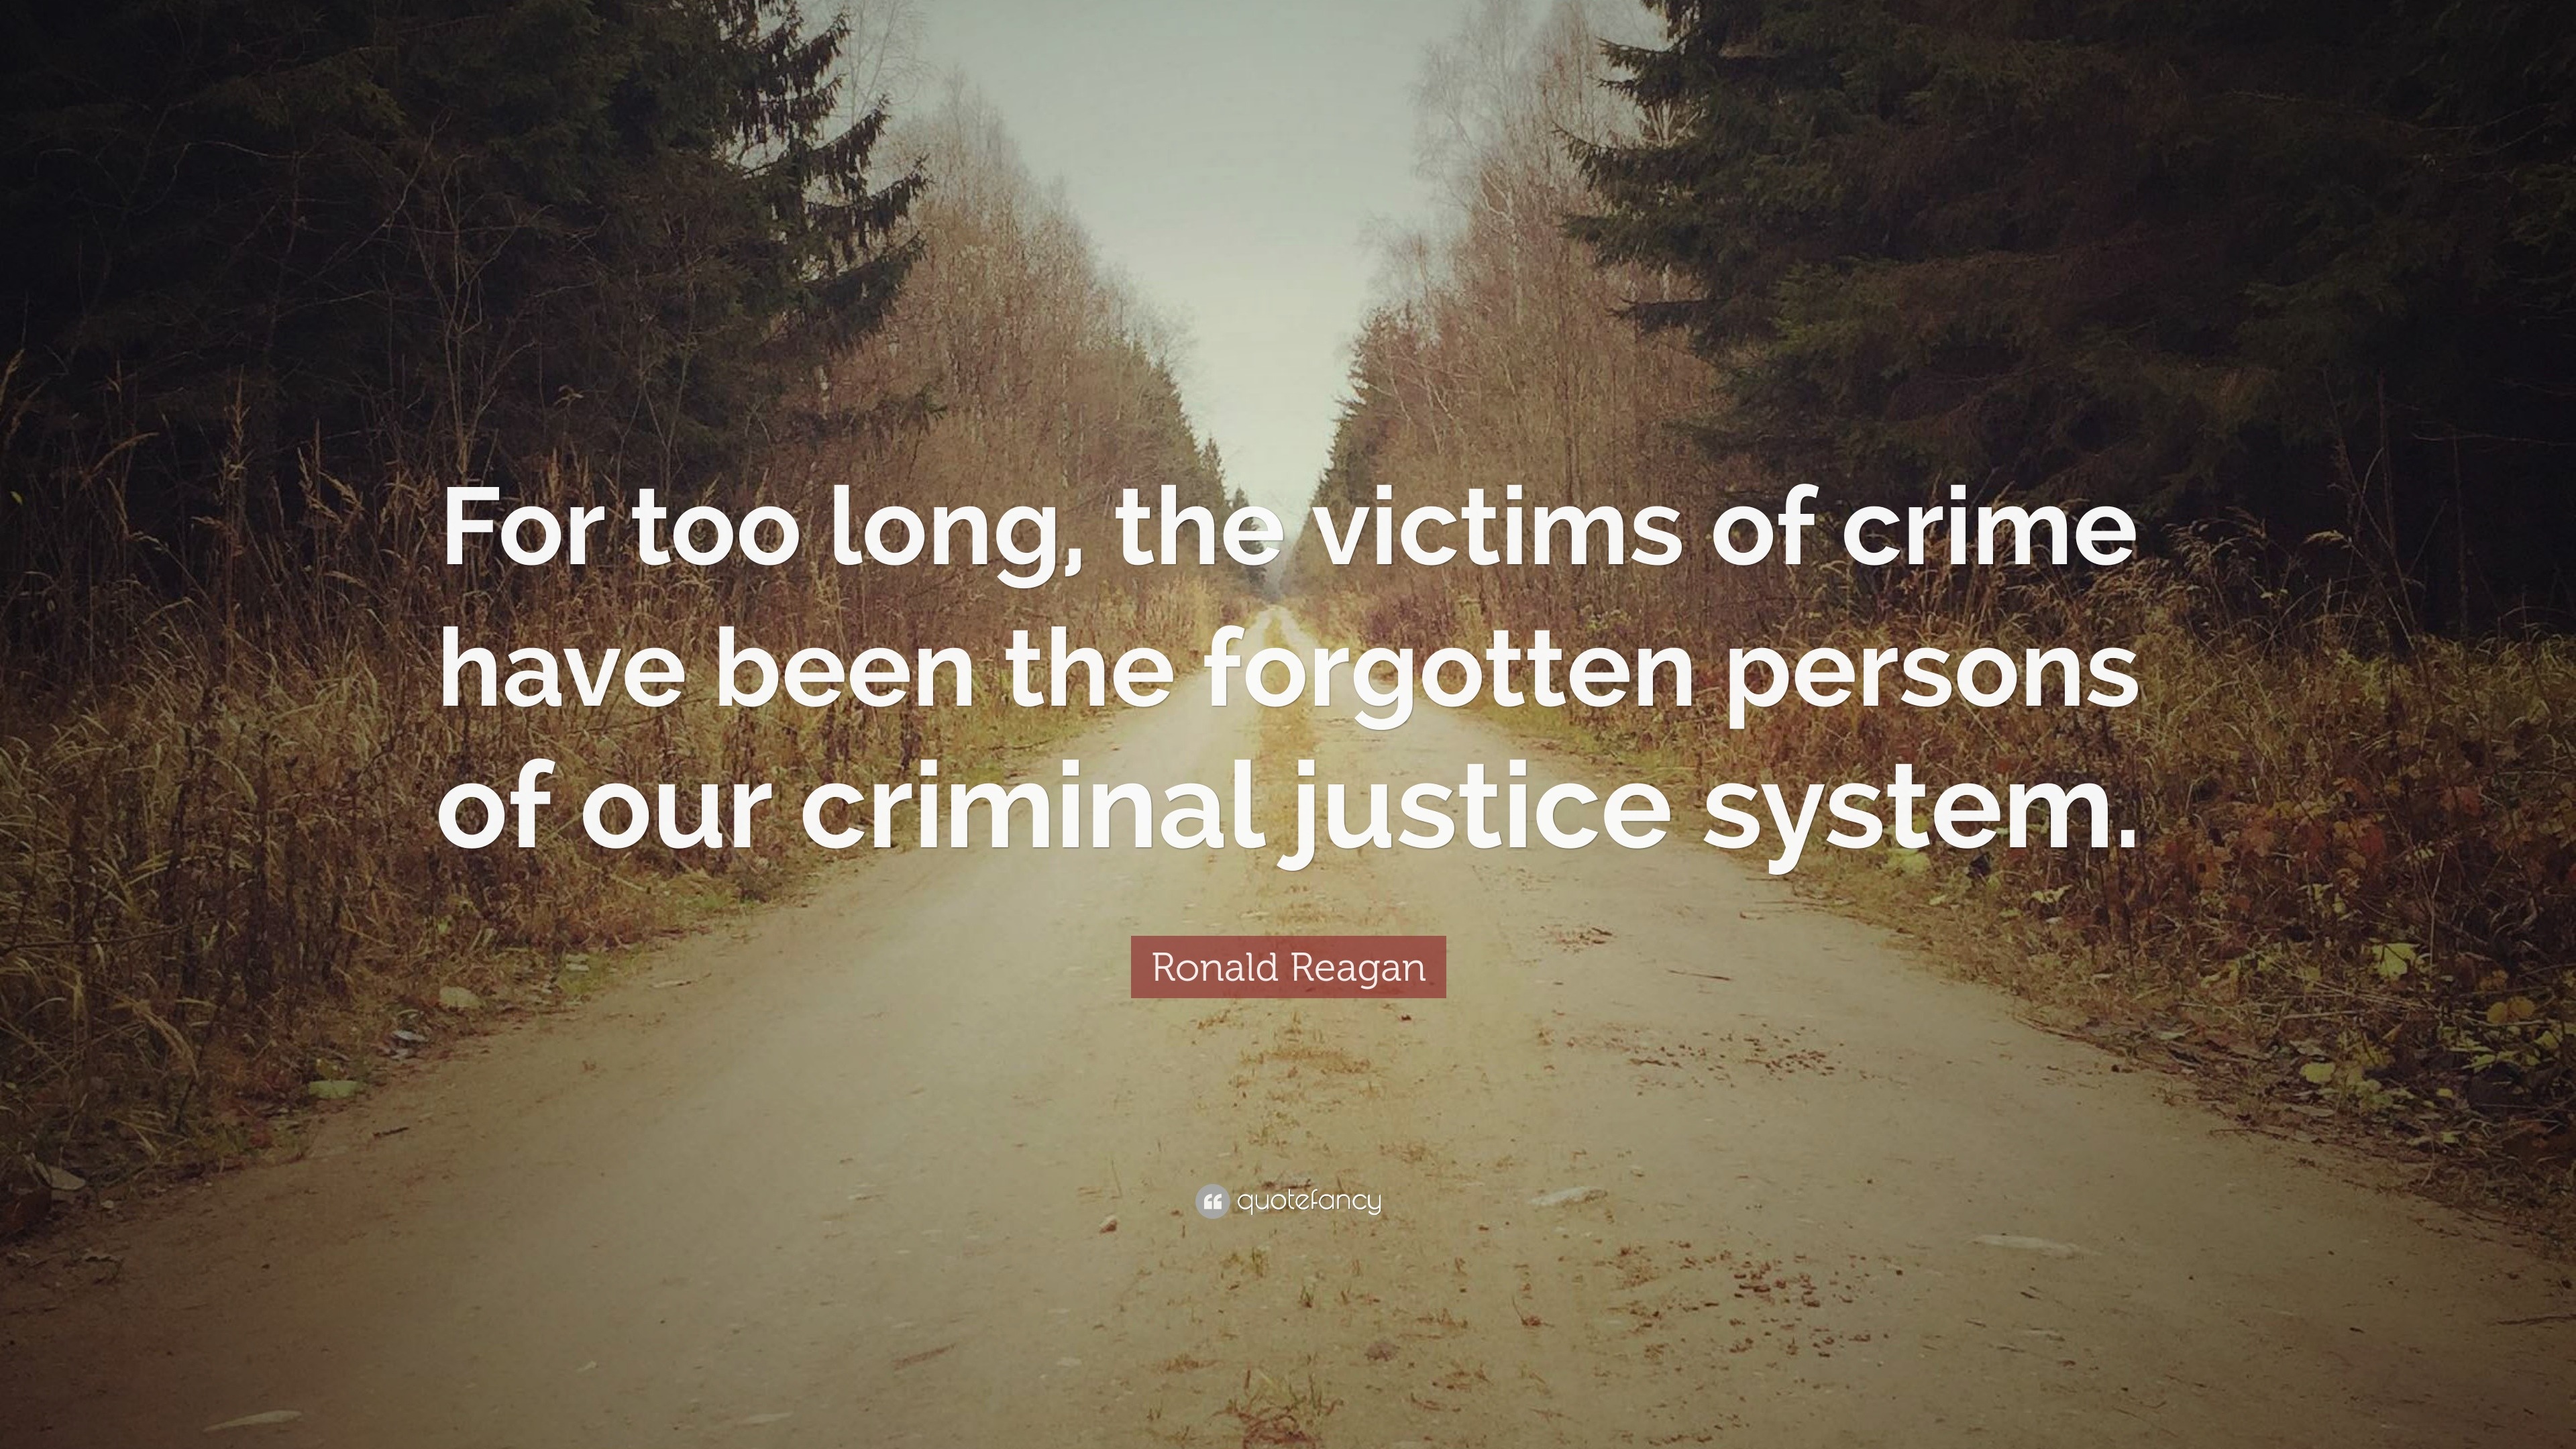 Ronald Reagan Quote: “For too long, the victims of crime have been the